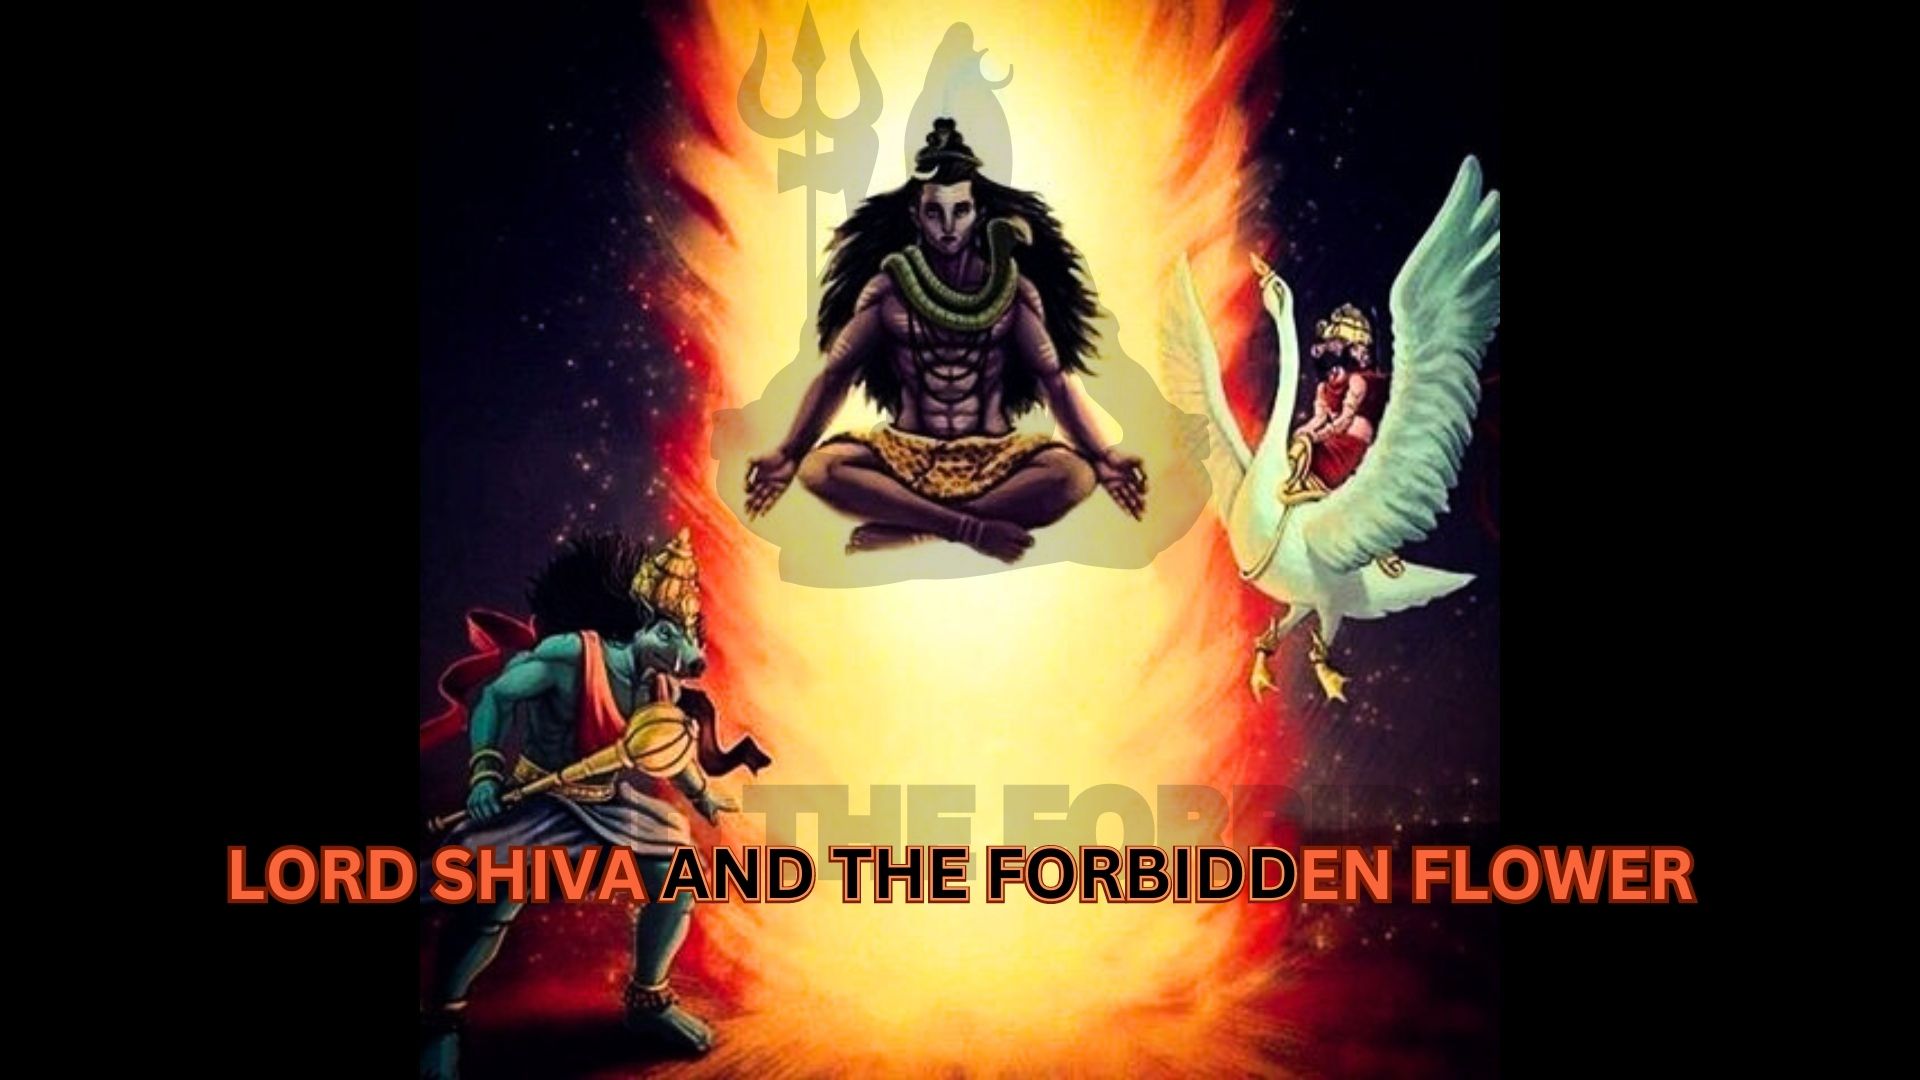 Lord Shiva and the Forbidden flower